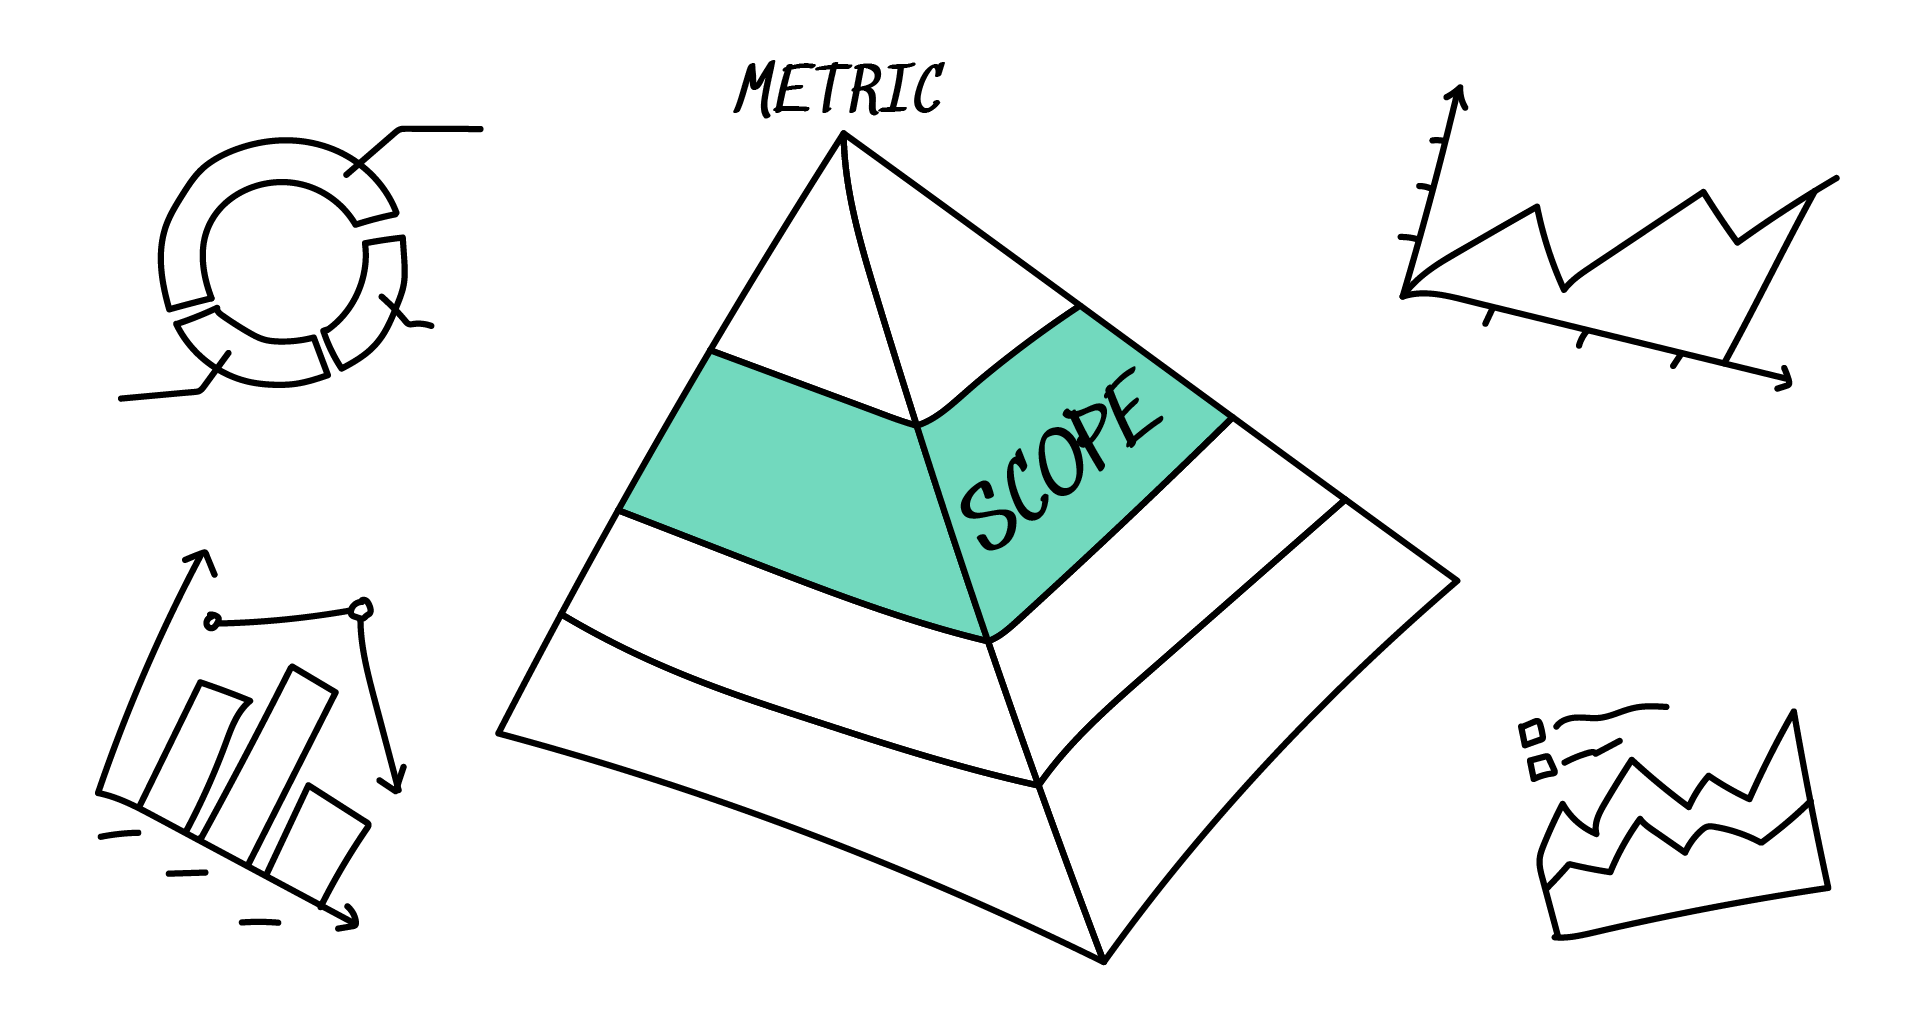 The scope of the metric